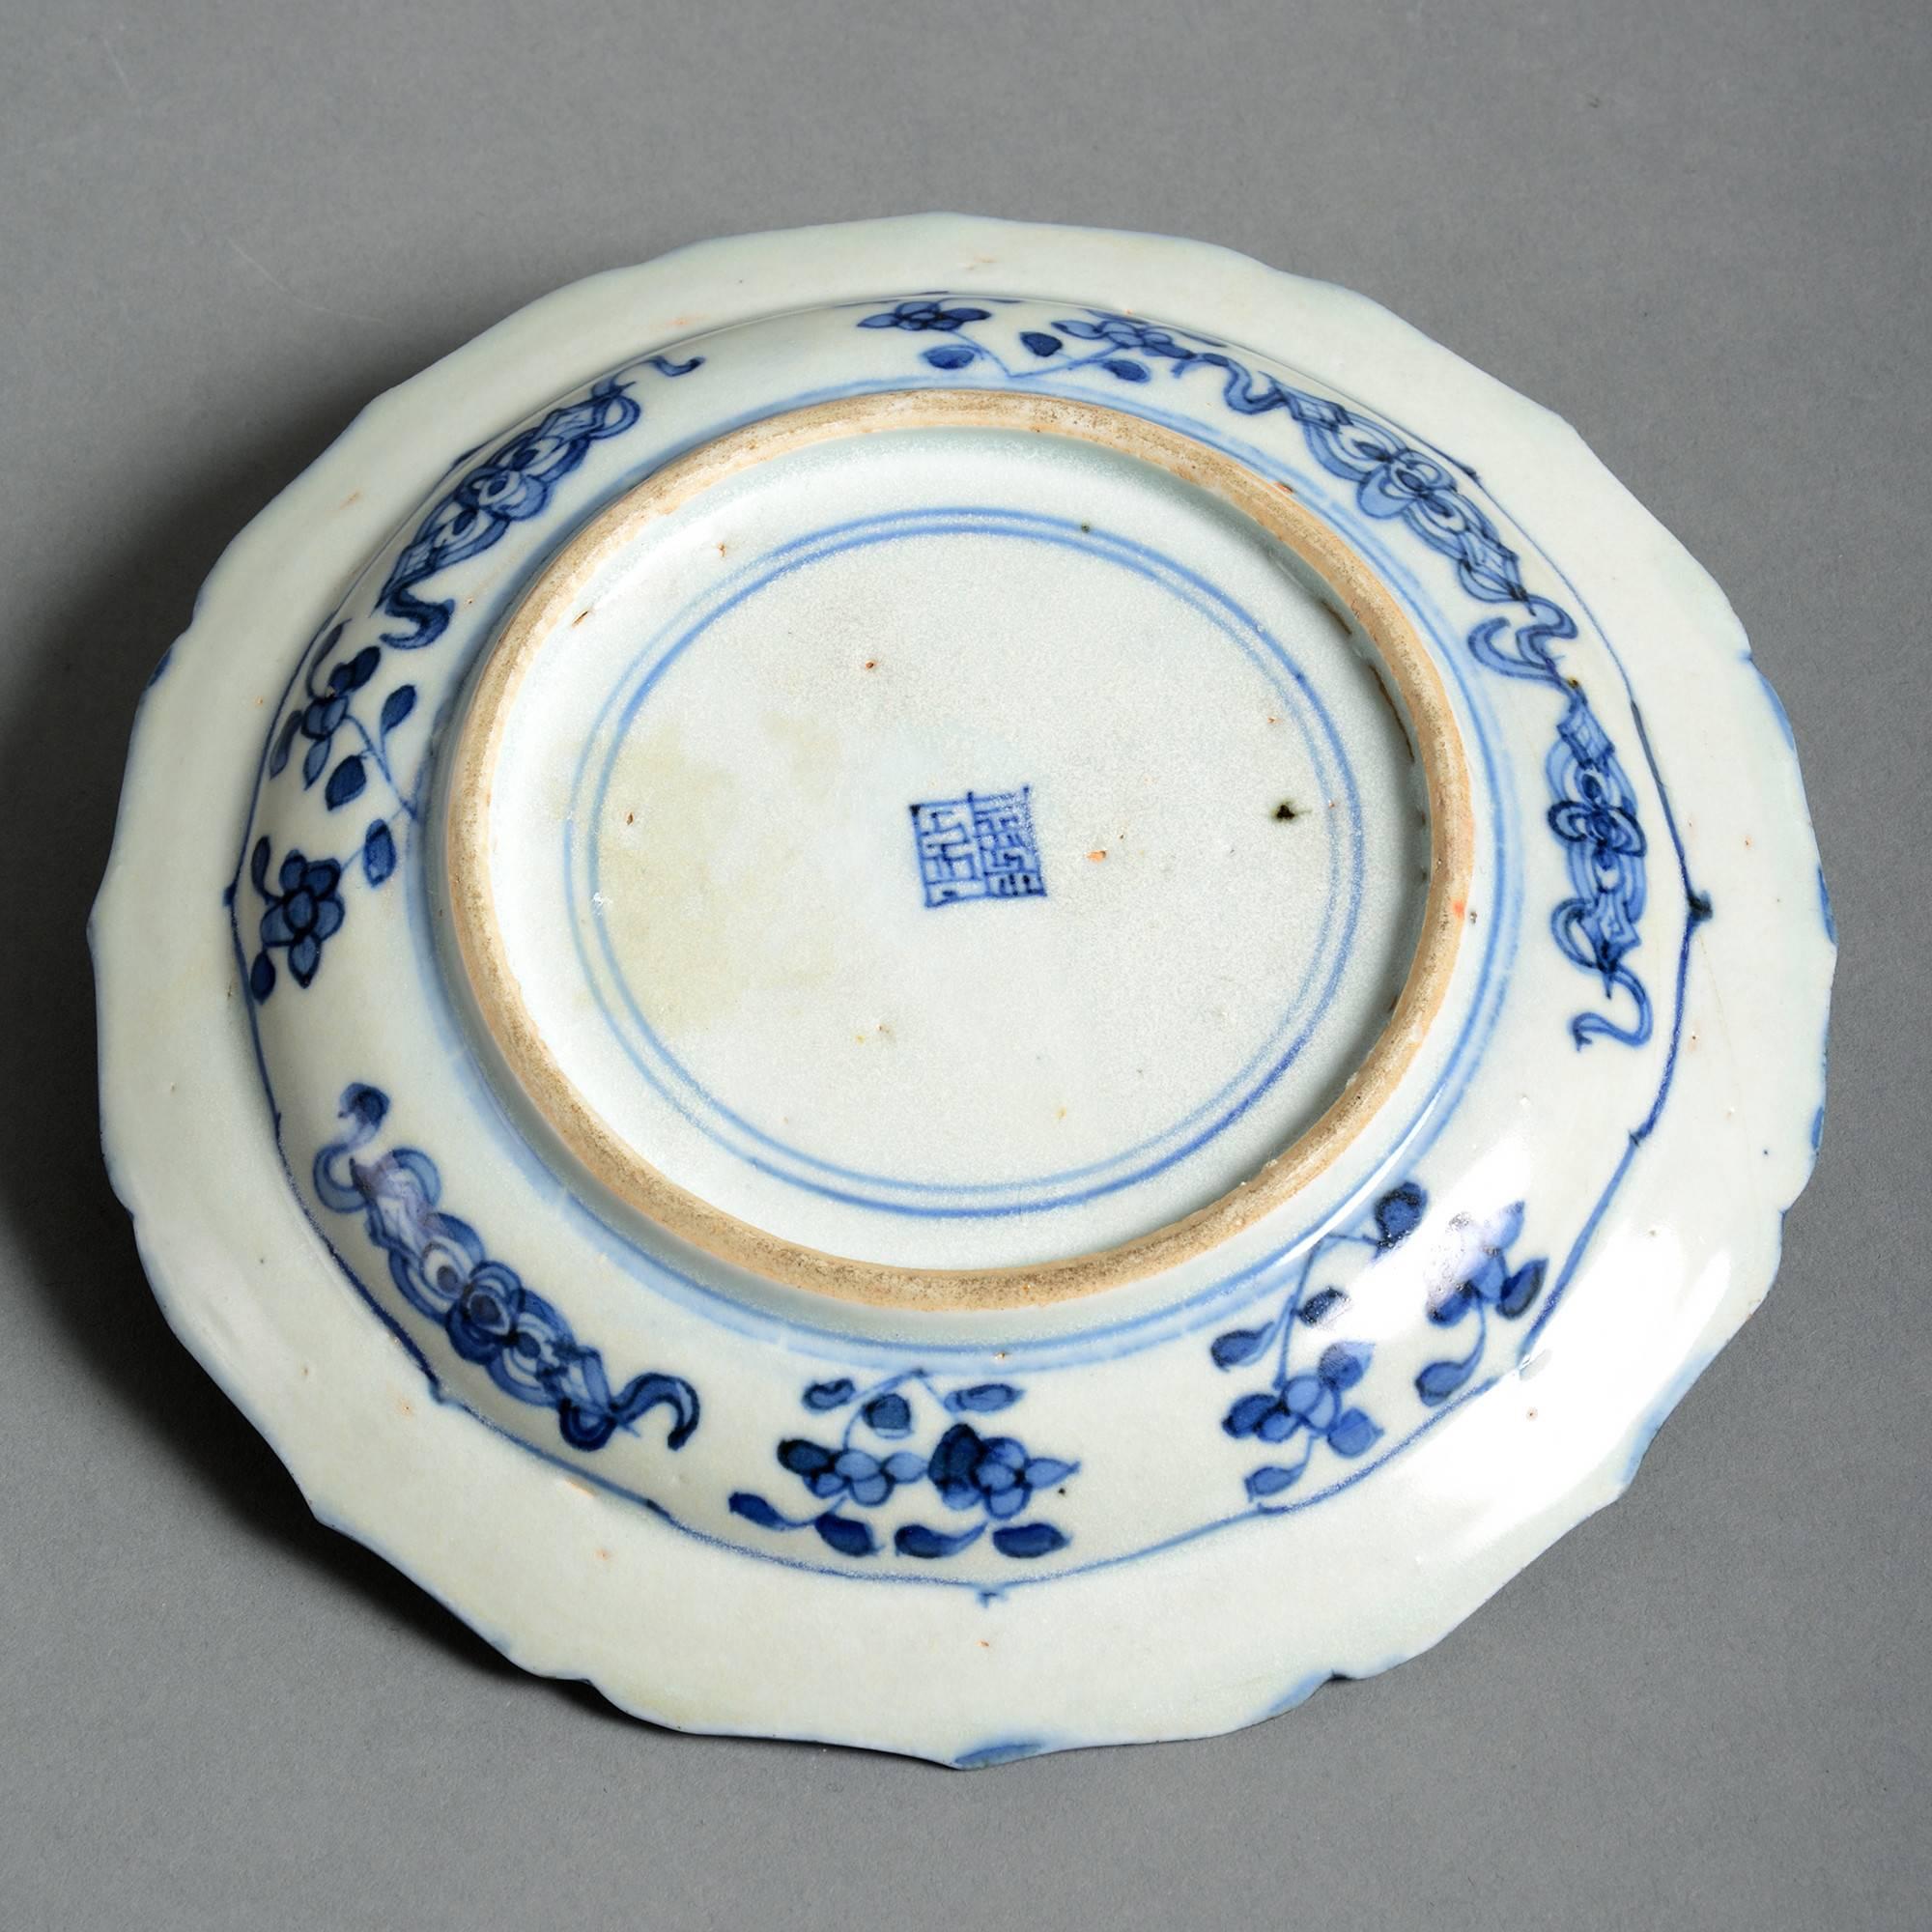 Chinese Mid-16th Century Ming Period Porcelain Plate